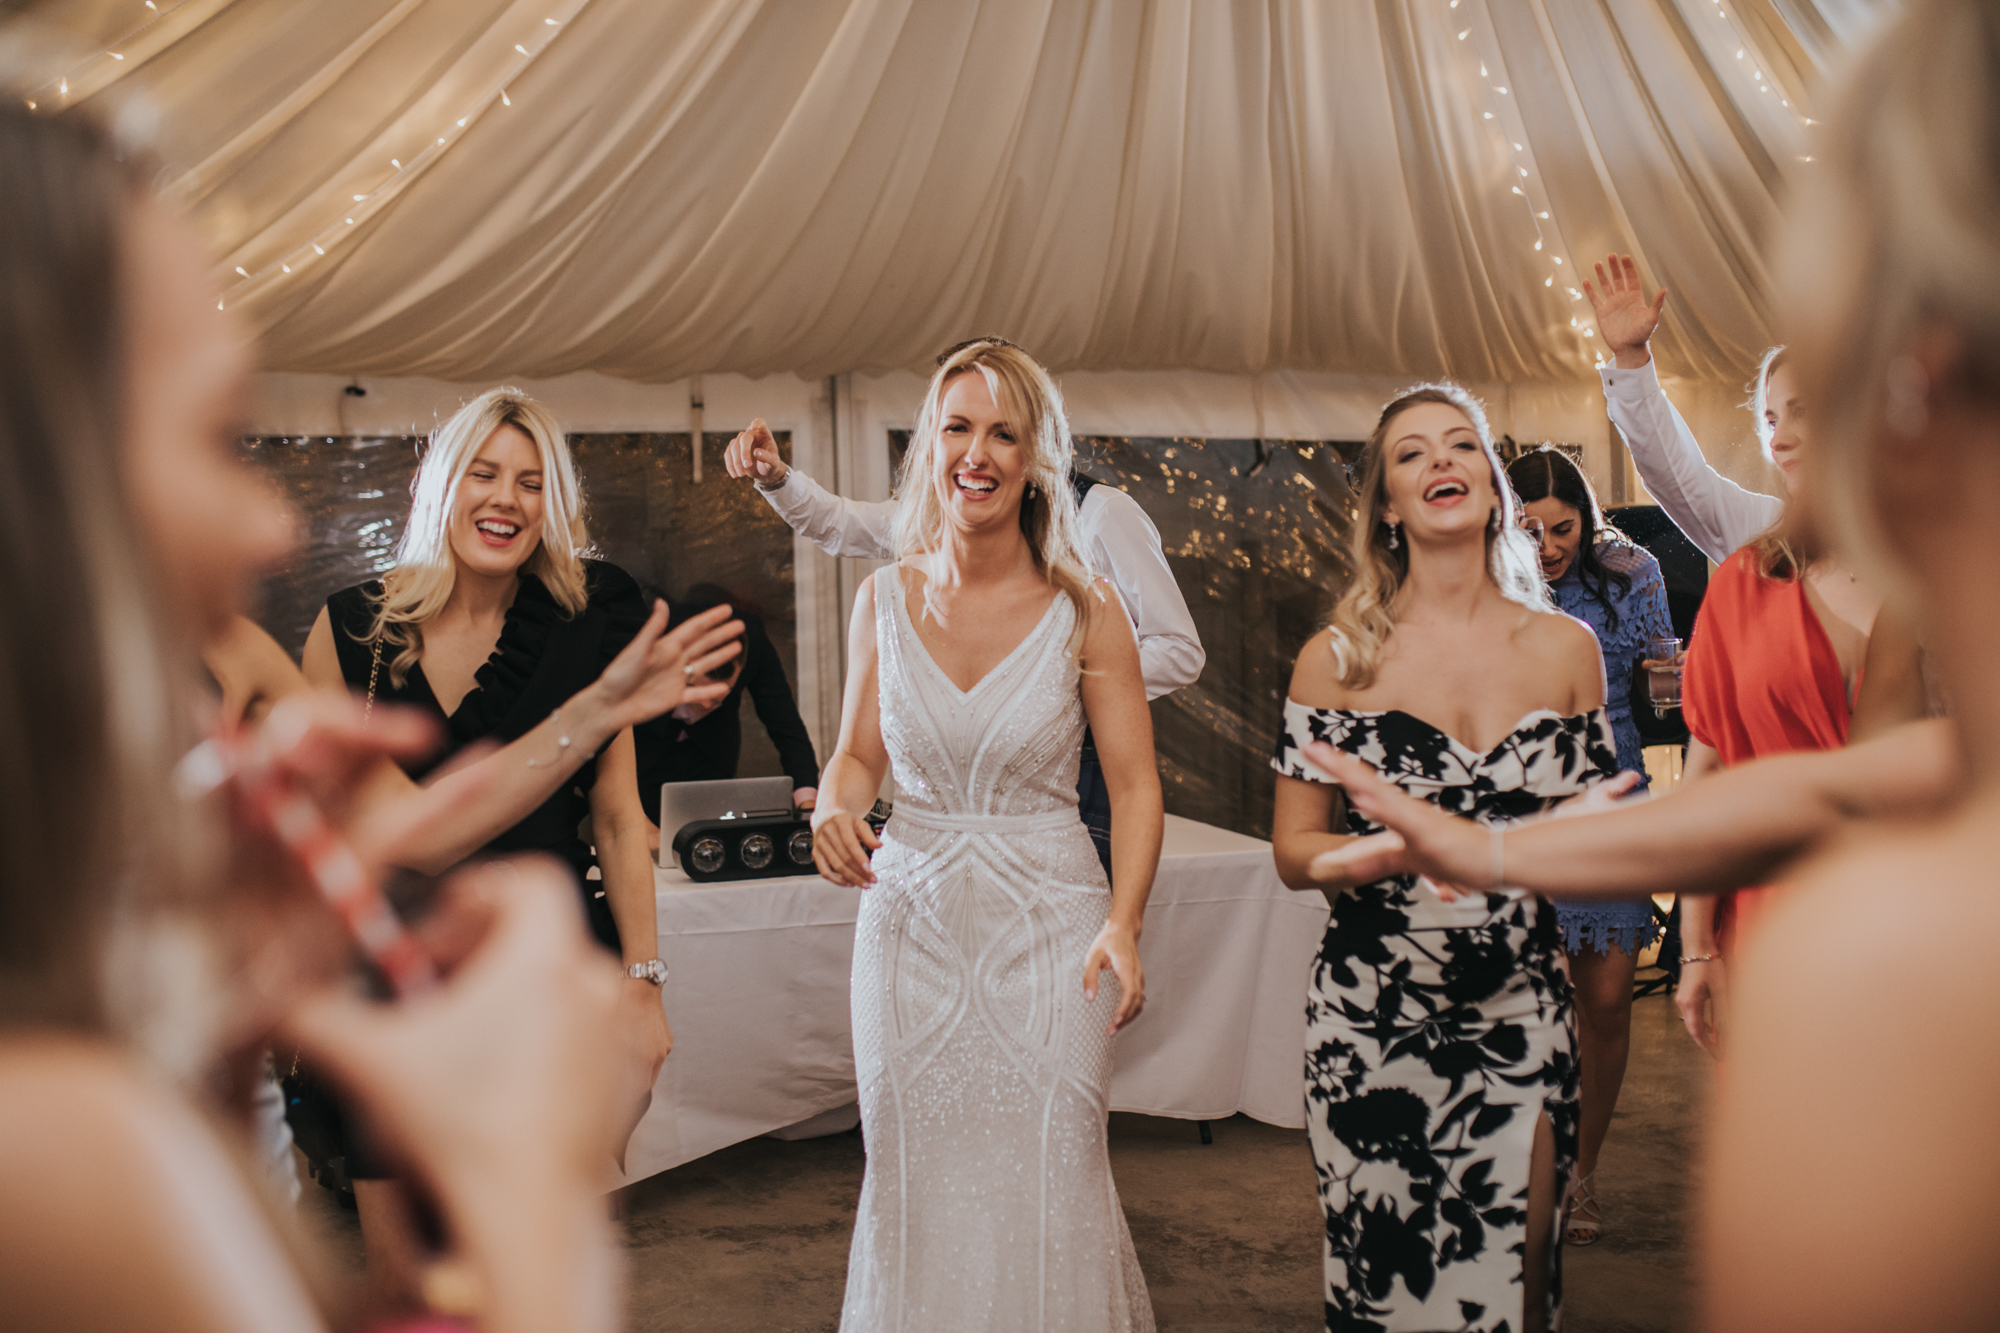 cow shed crail bride dancing photo